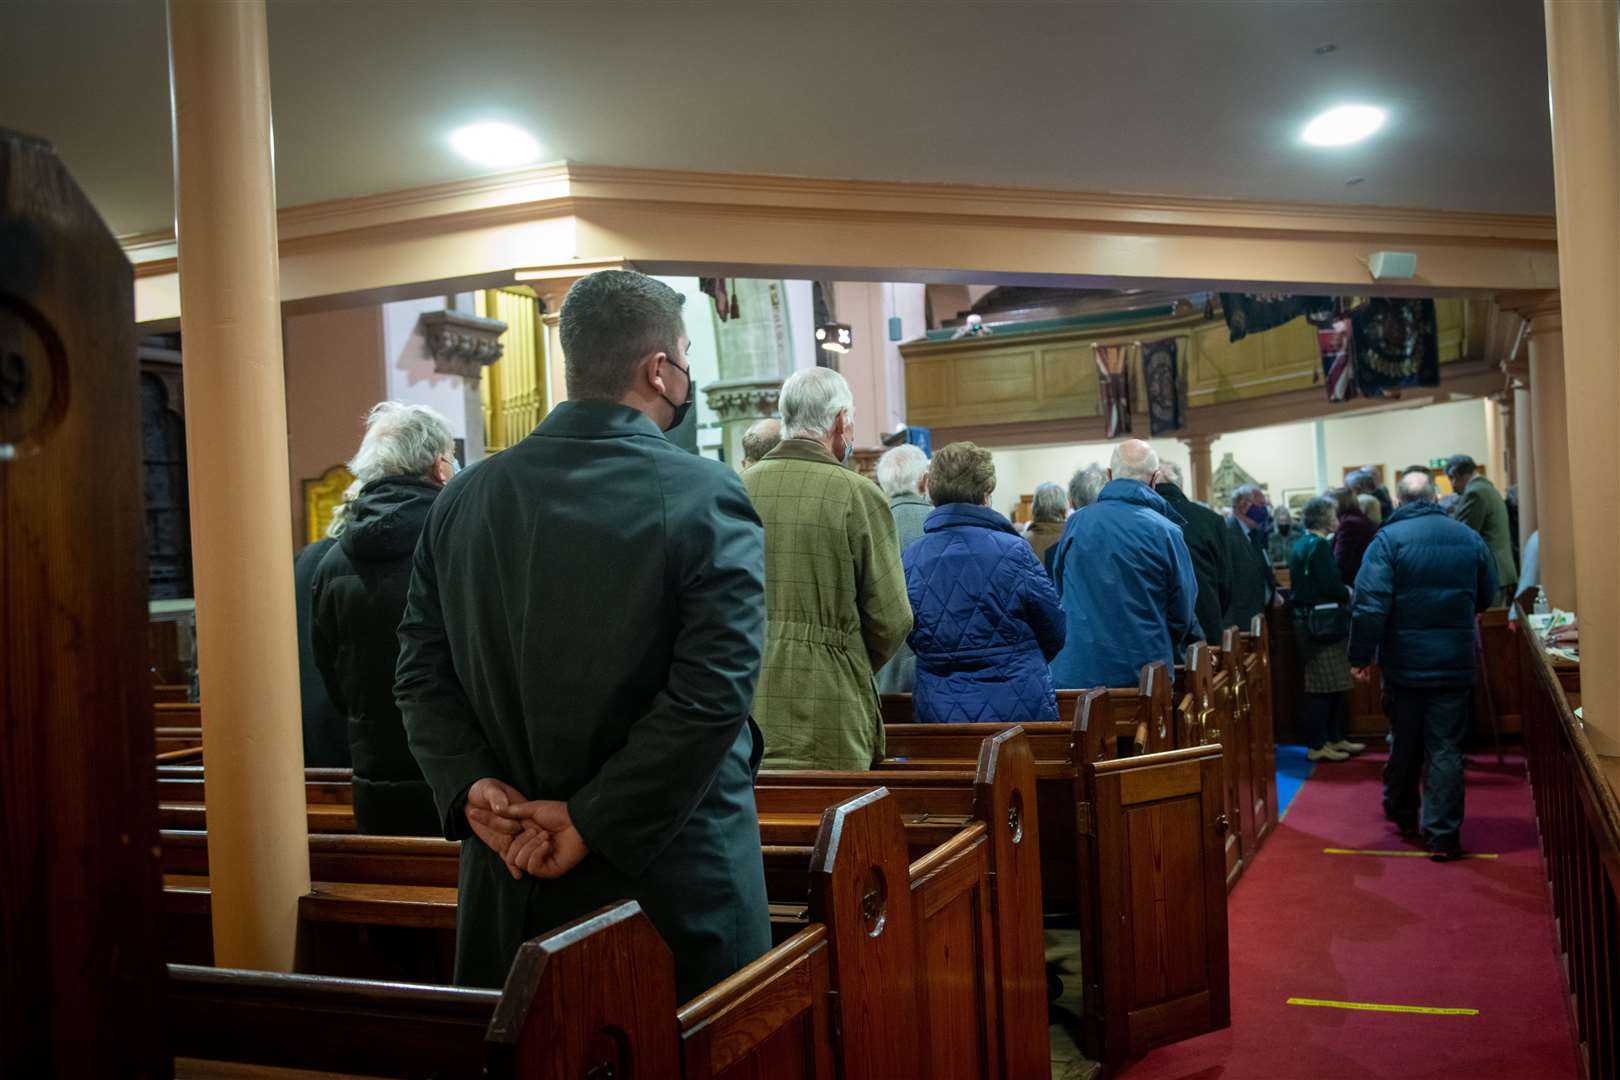 The congregation marks the end of worship at the Old High Church in Inverness.